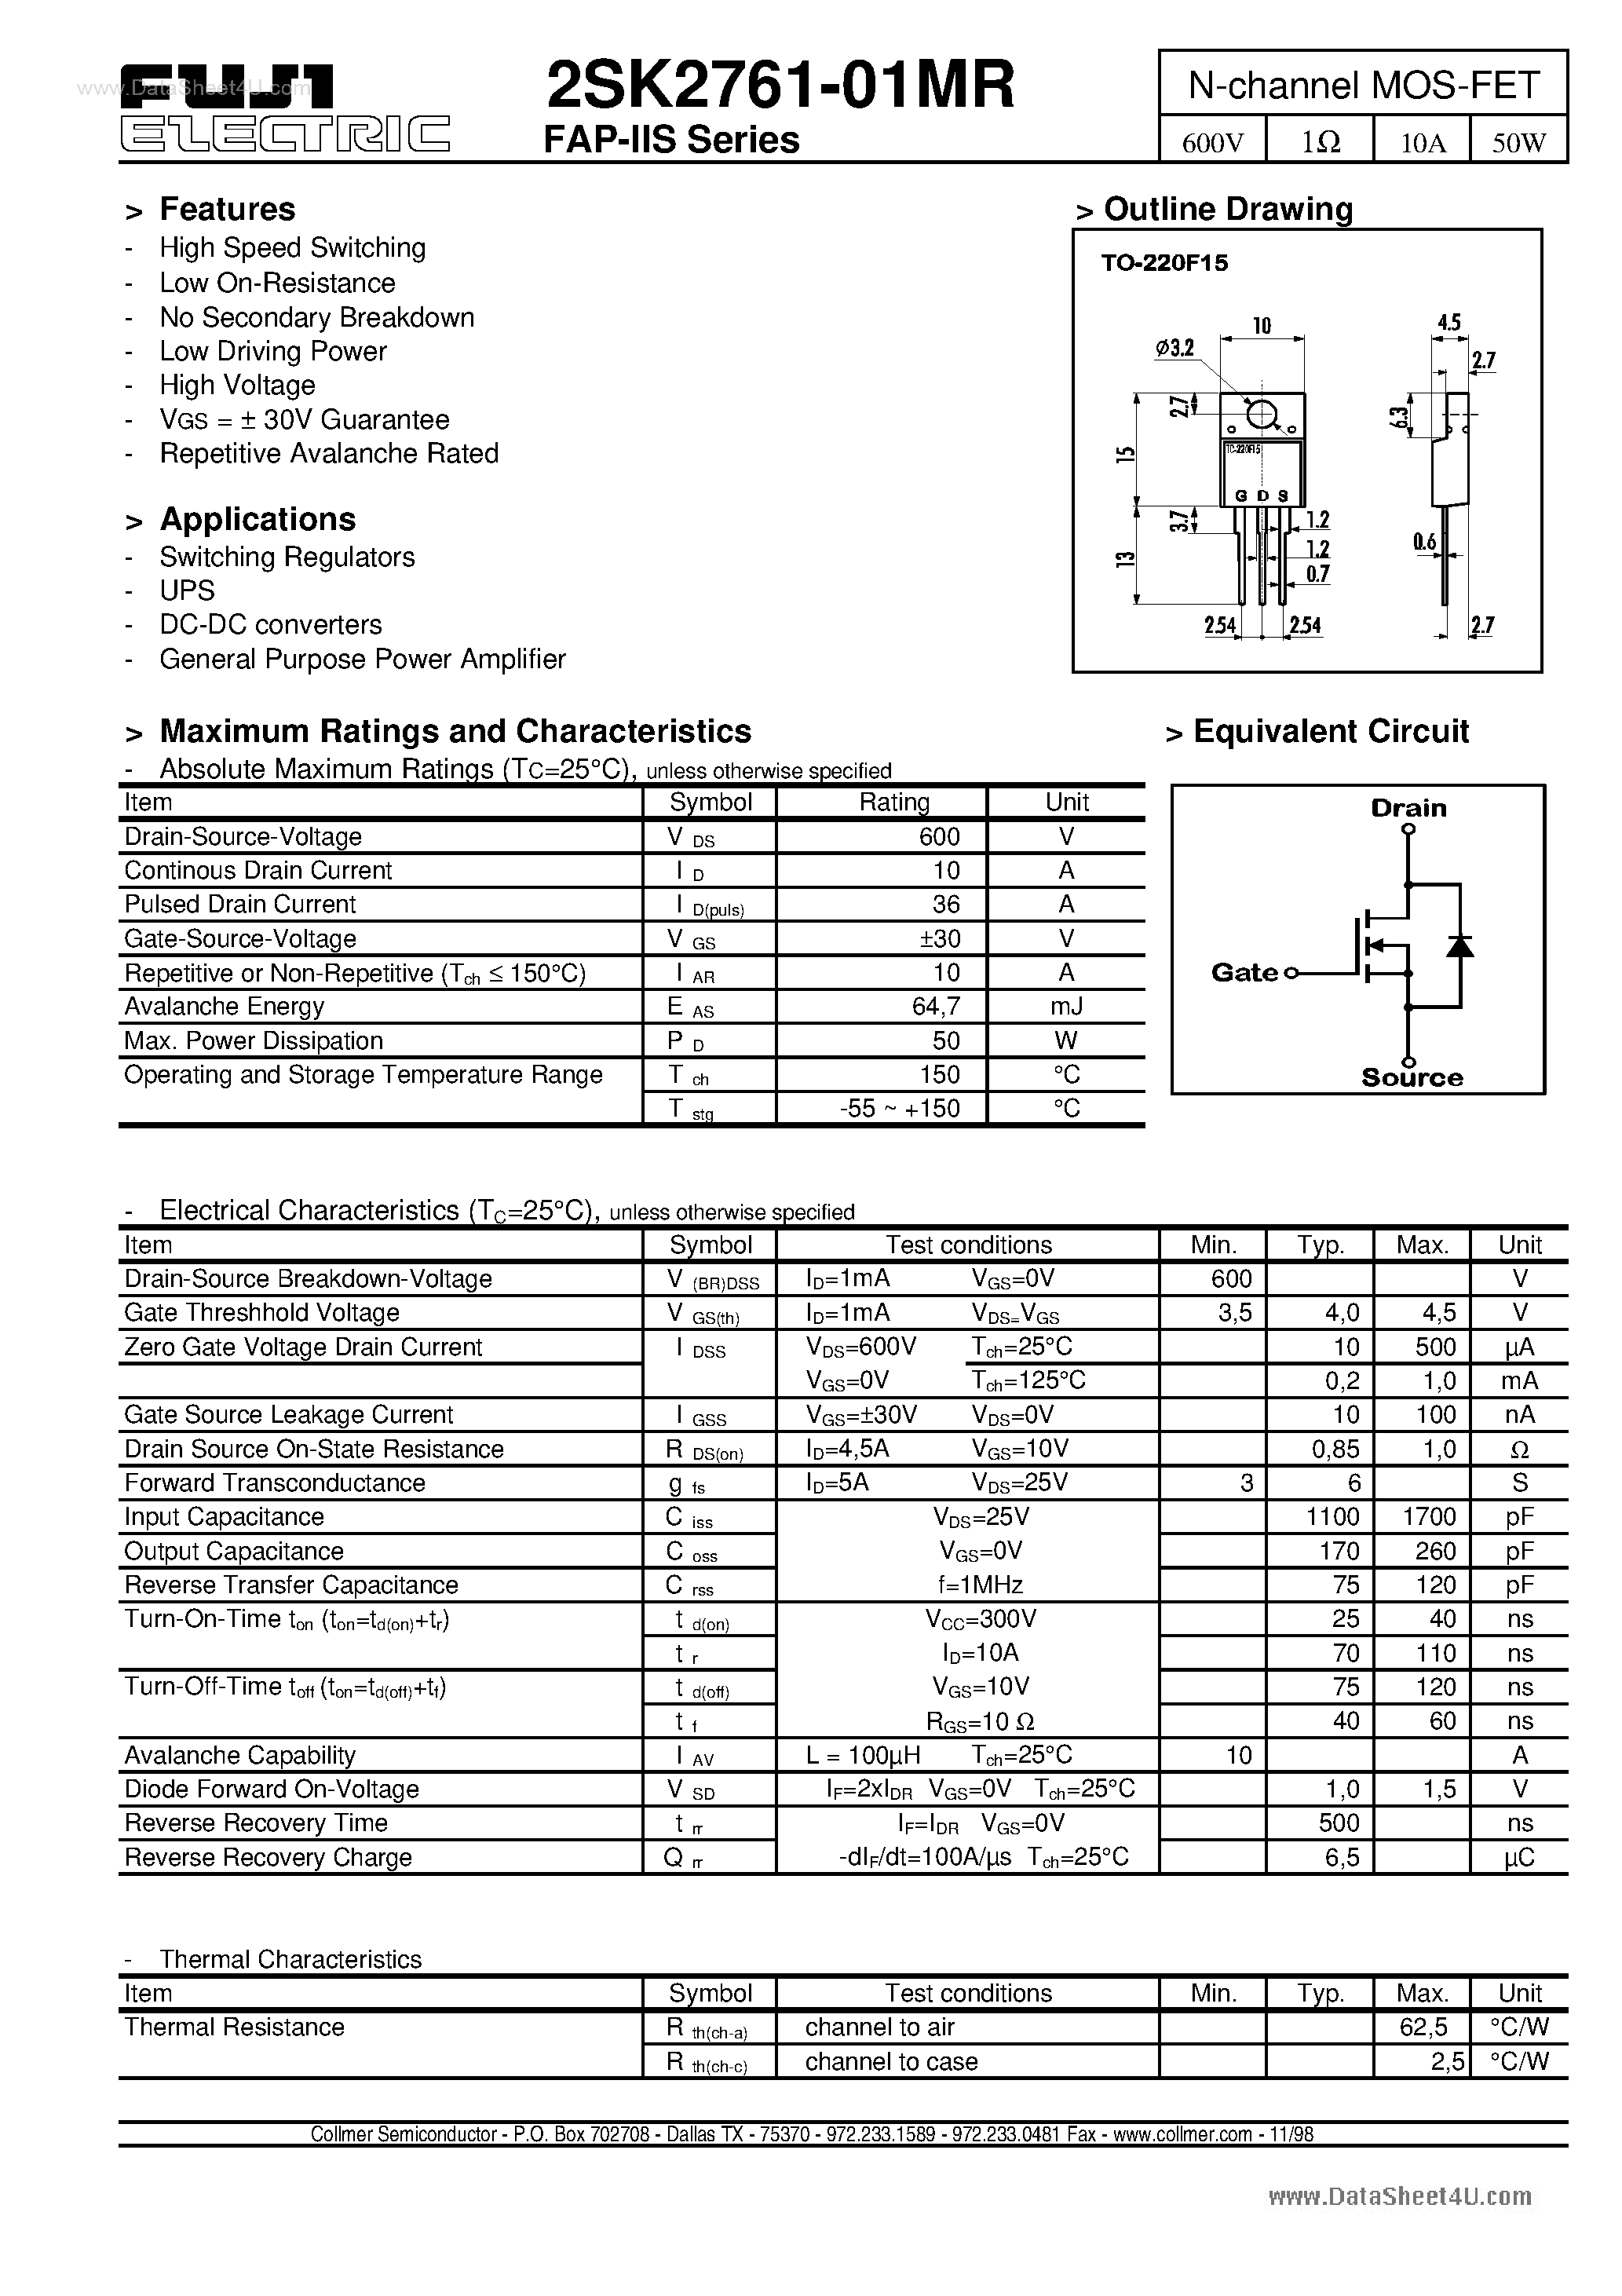 Datasheet K2761 - Search -----> 2SK2761 page 1